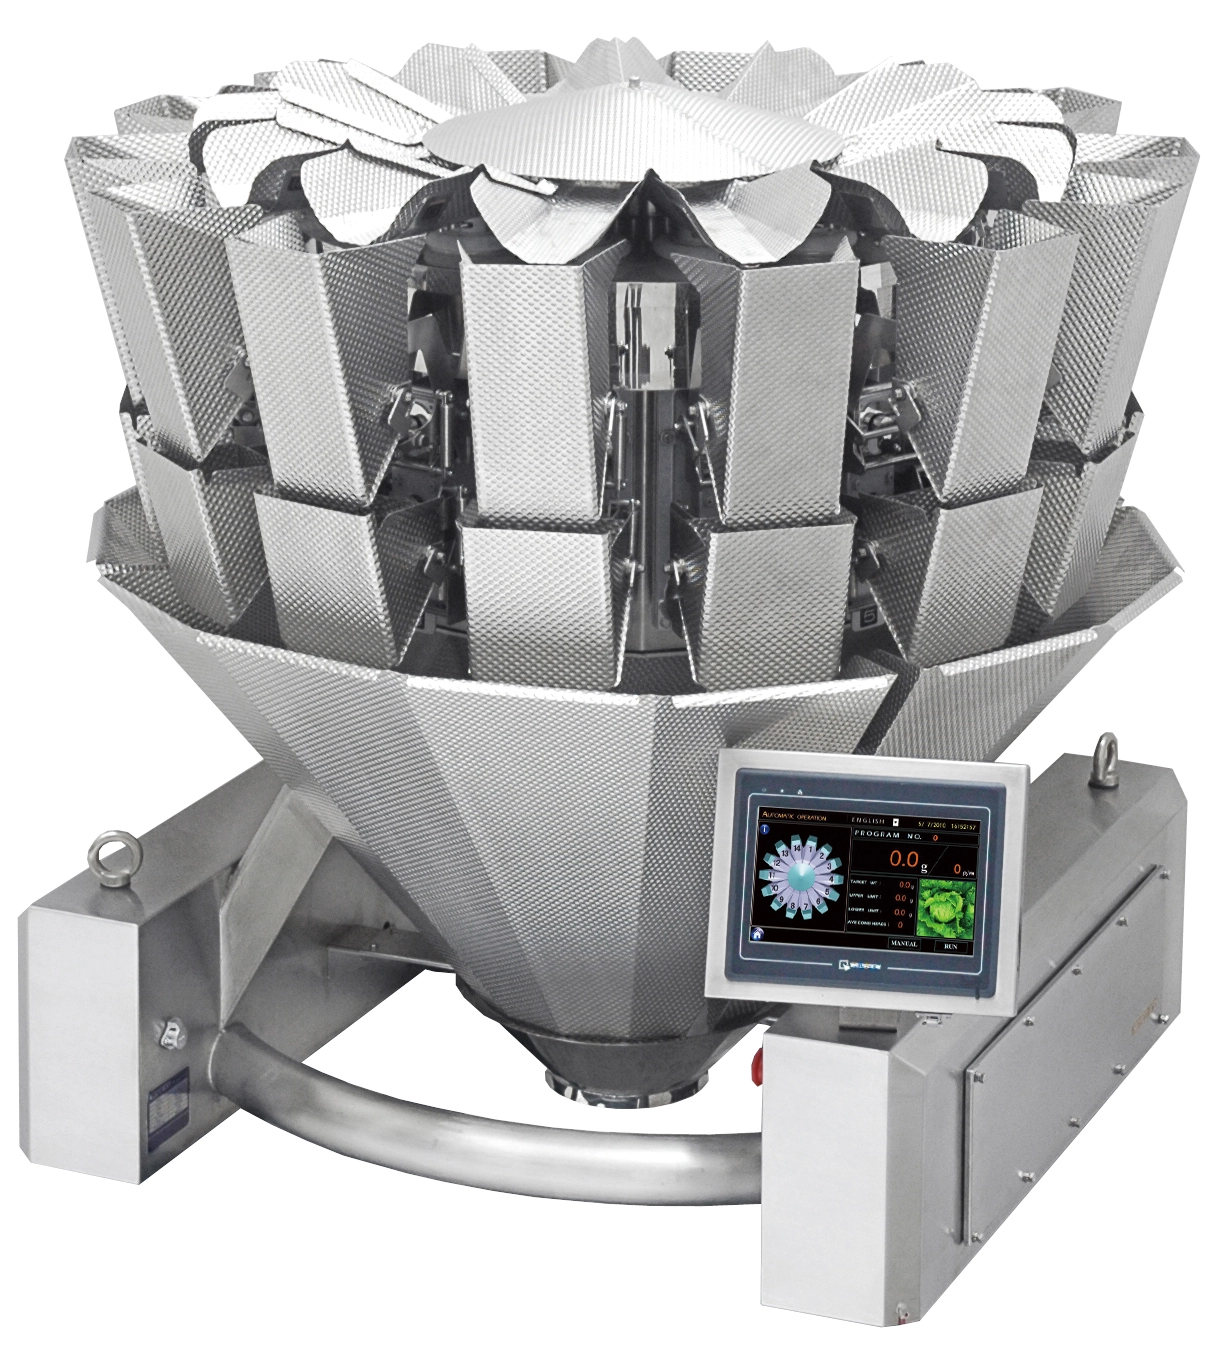 A PLUS SERIES 10&14 HEADS WEIGHER PACKING MACHINE